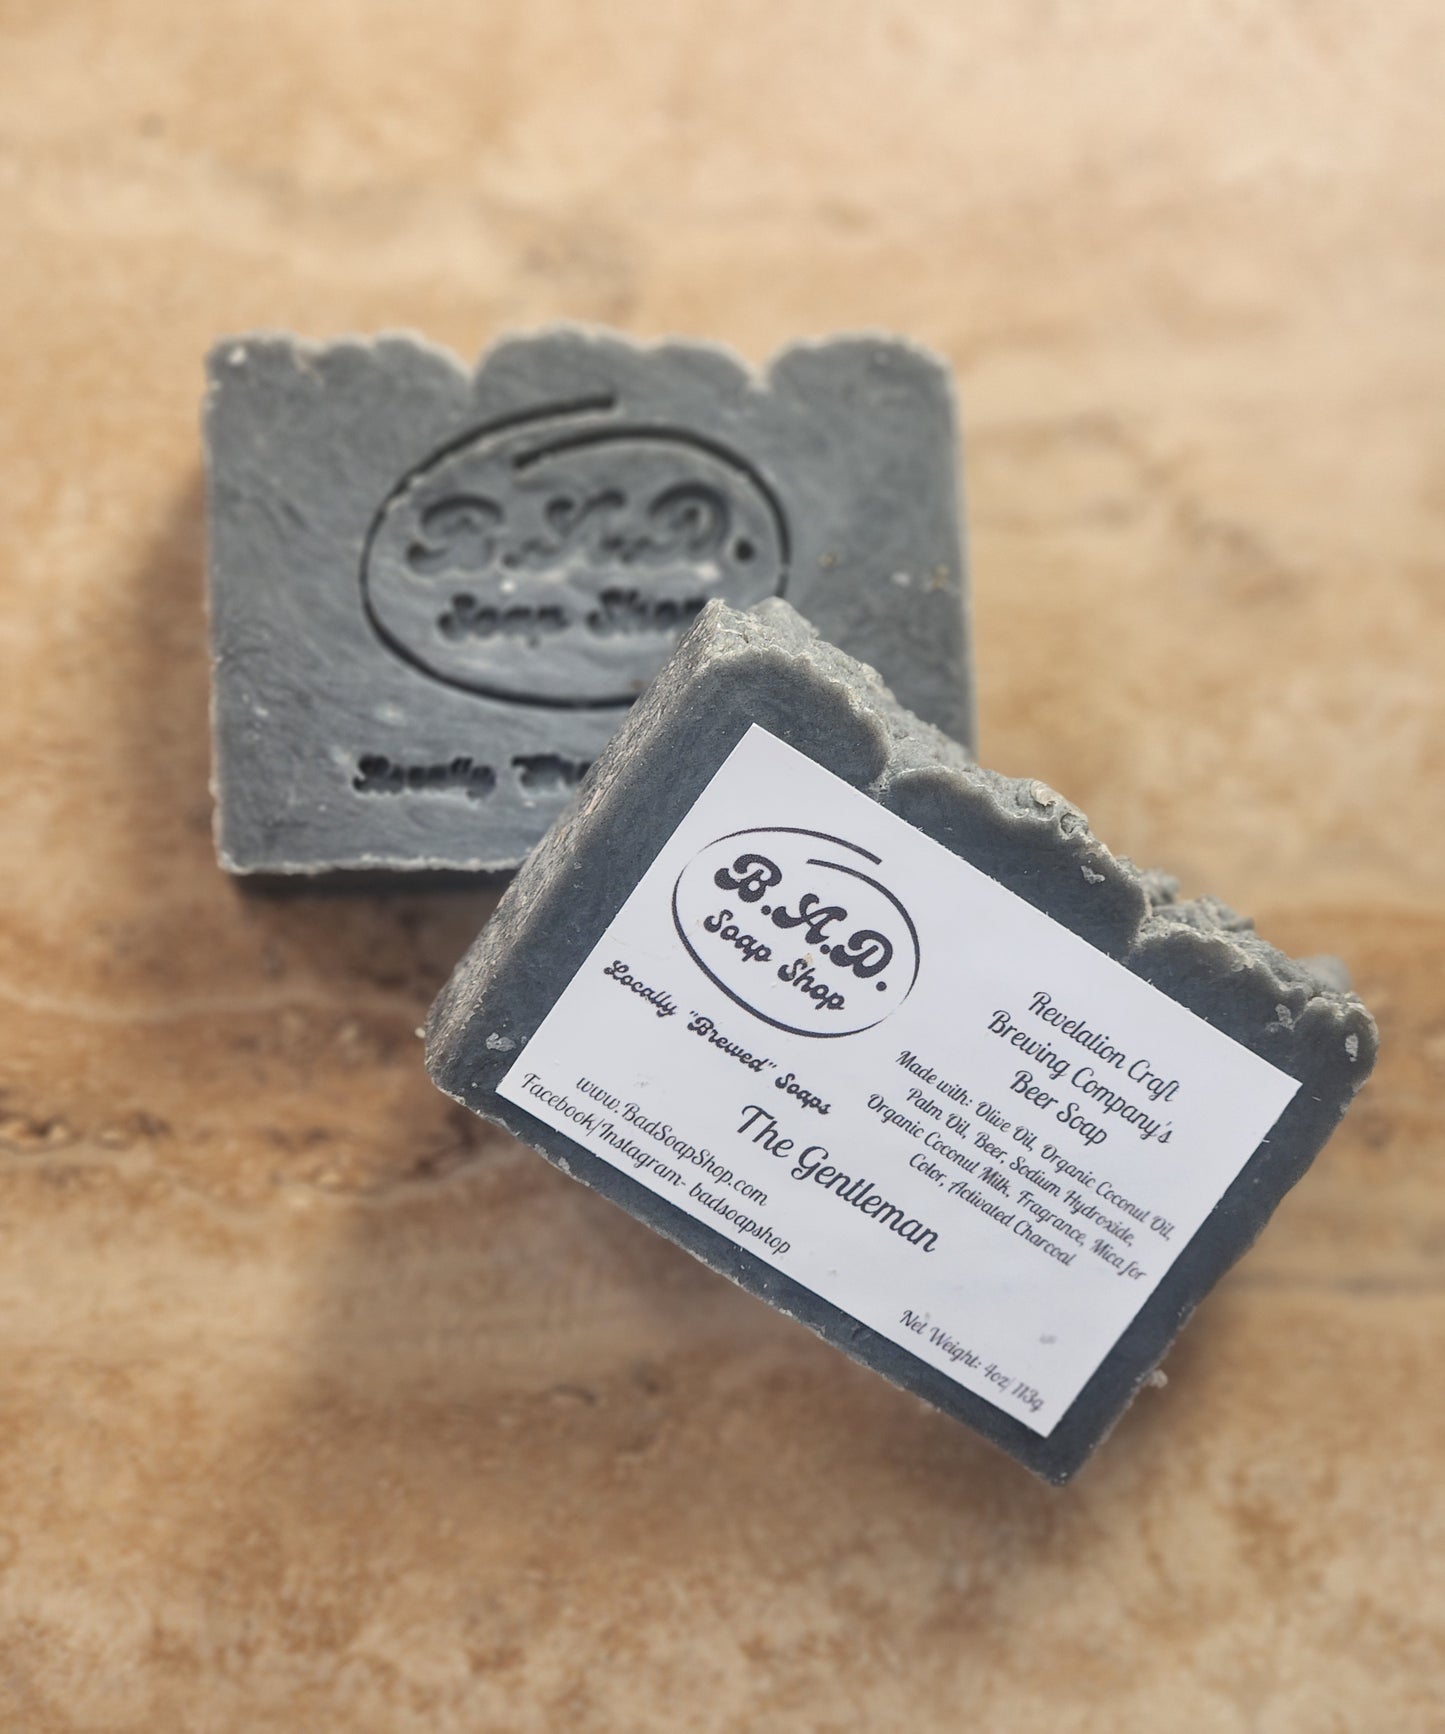 Natural "The Gentleman" Handmade Beer Soap with Activated Charcoal